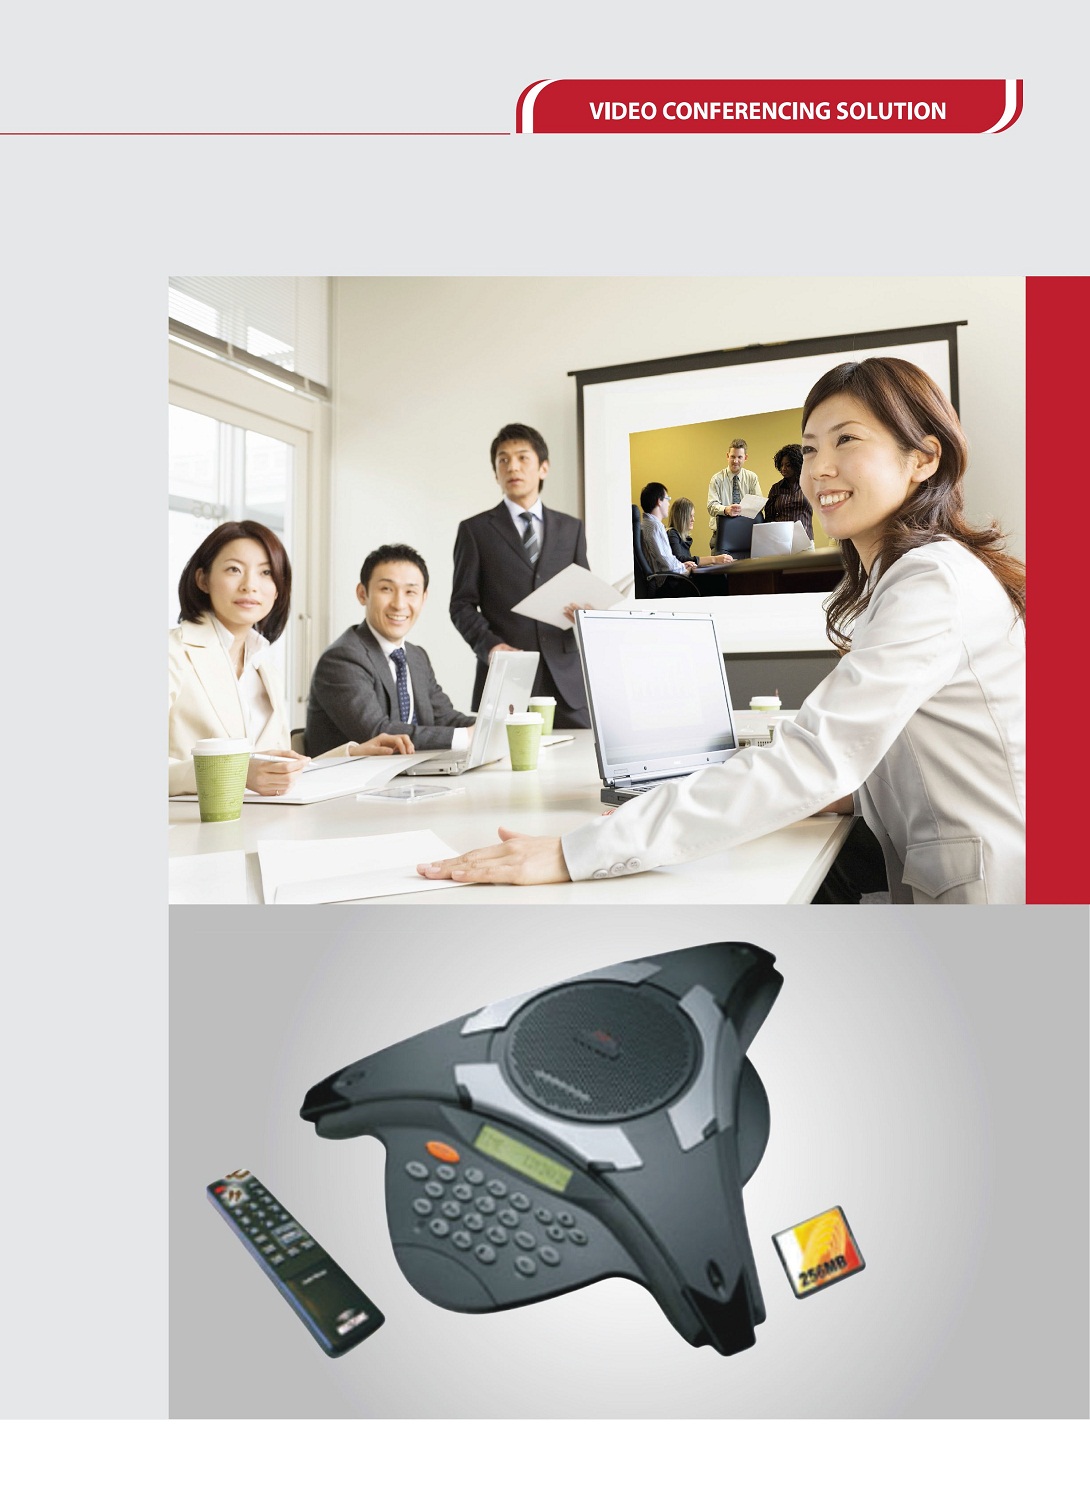 VIDEO CONFERENCING SOLUTION